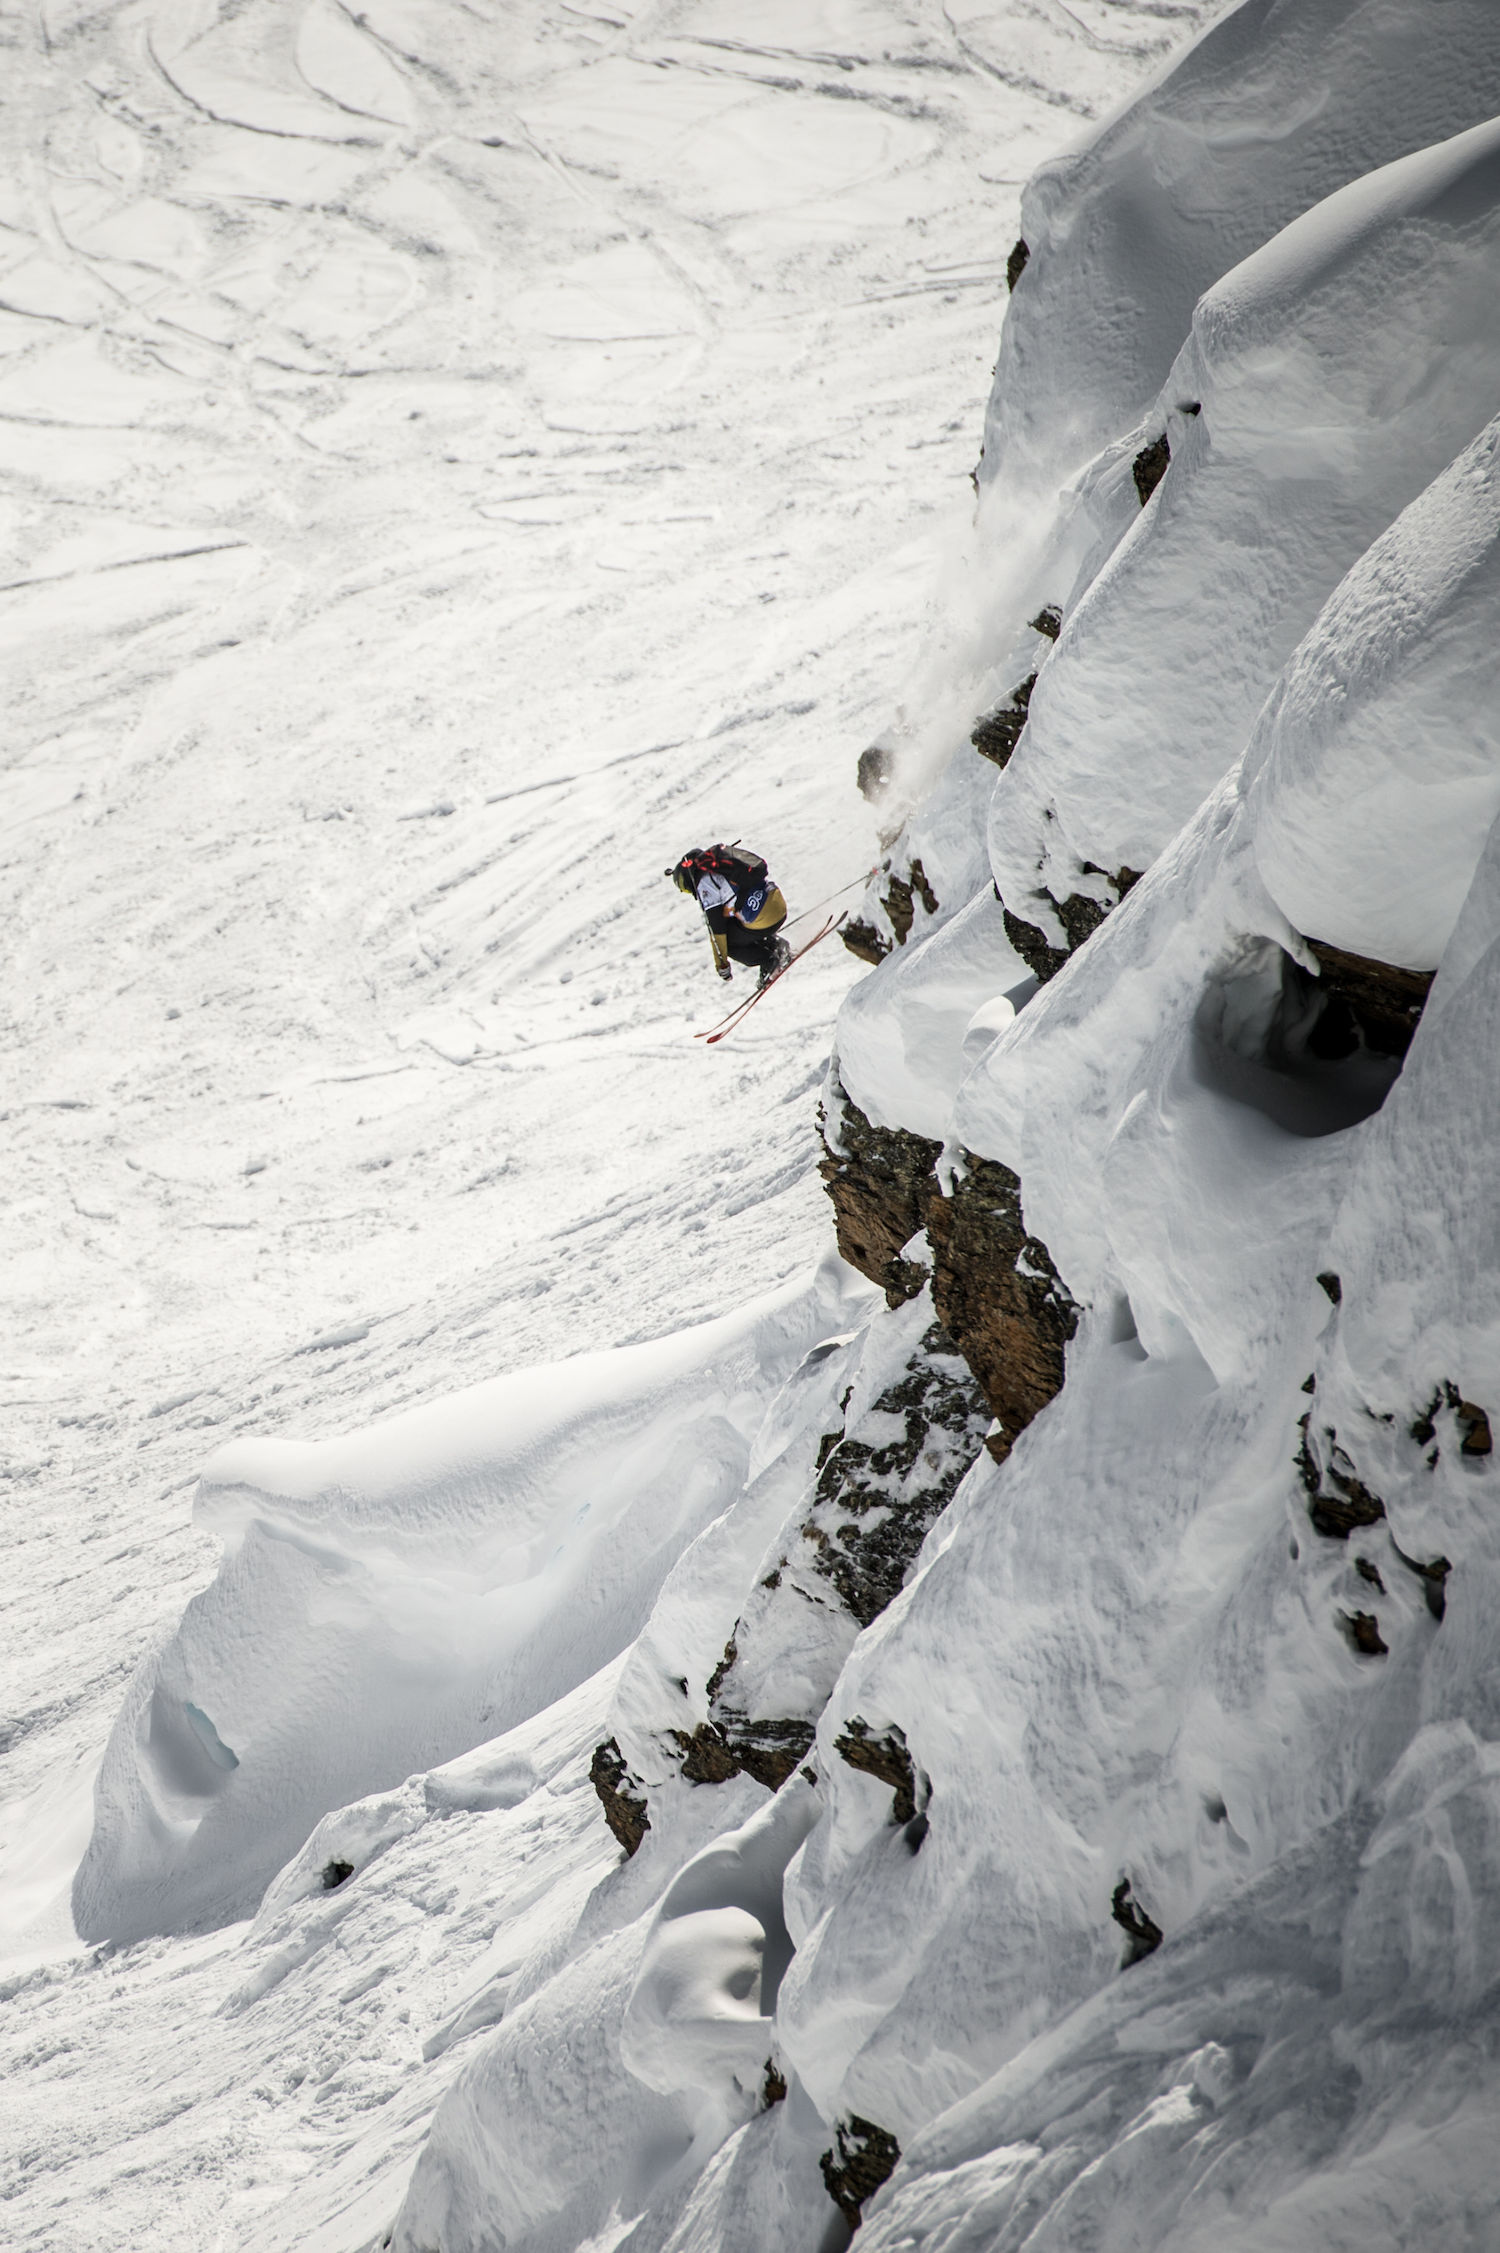 Simeon Pavlov competes at an Open Faces freeride contest in Kappl, Austria in 2019